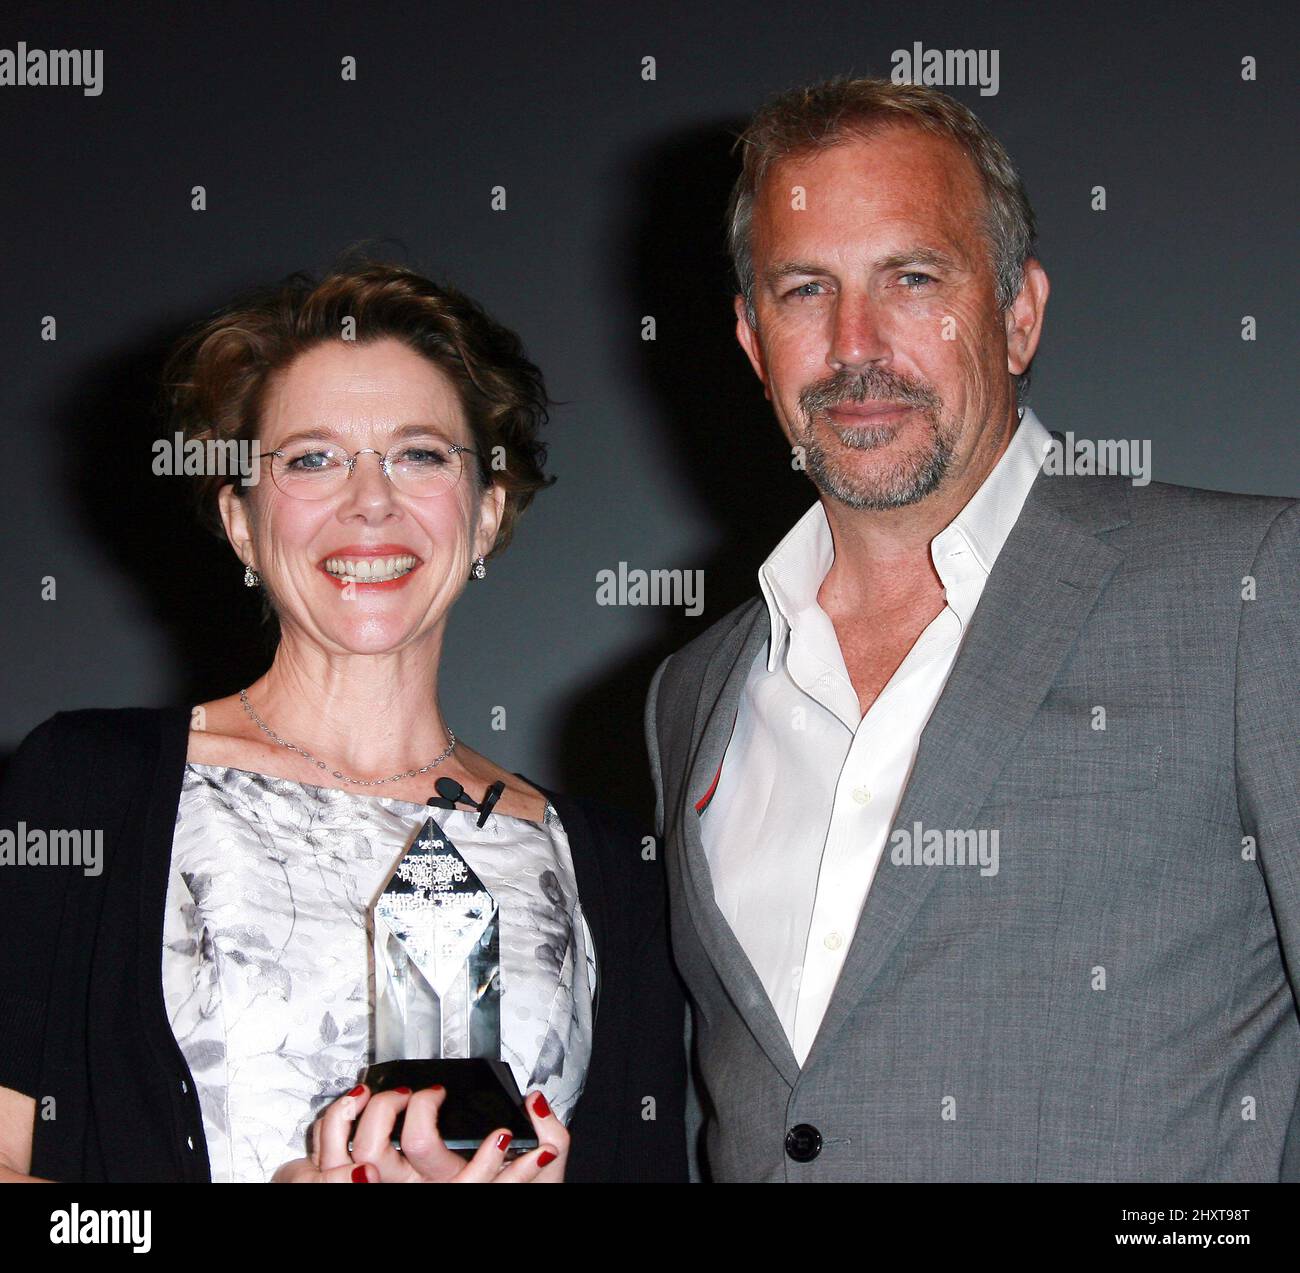 Kevin Costner attends as Annette Bening is honored with the American Riviera Award at the 2011 Santa Barbara International Film Festival held at the Arlington Theater in Santa Barbara, CA. Stock Photo